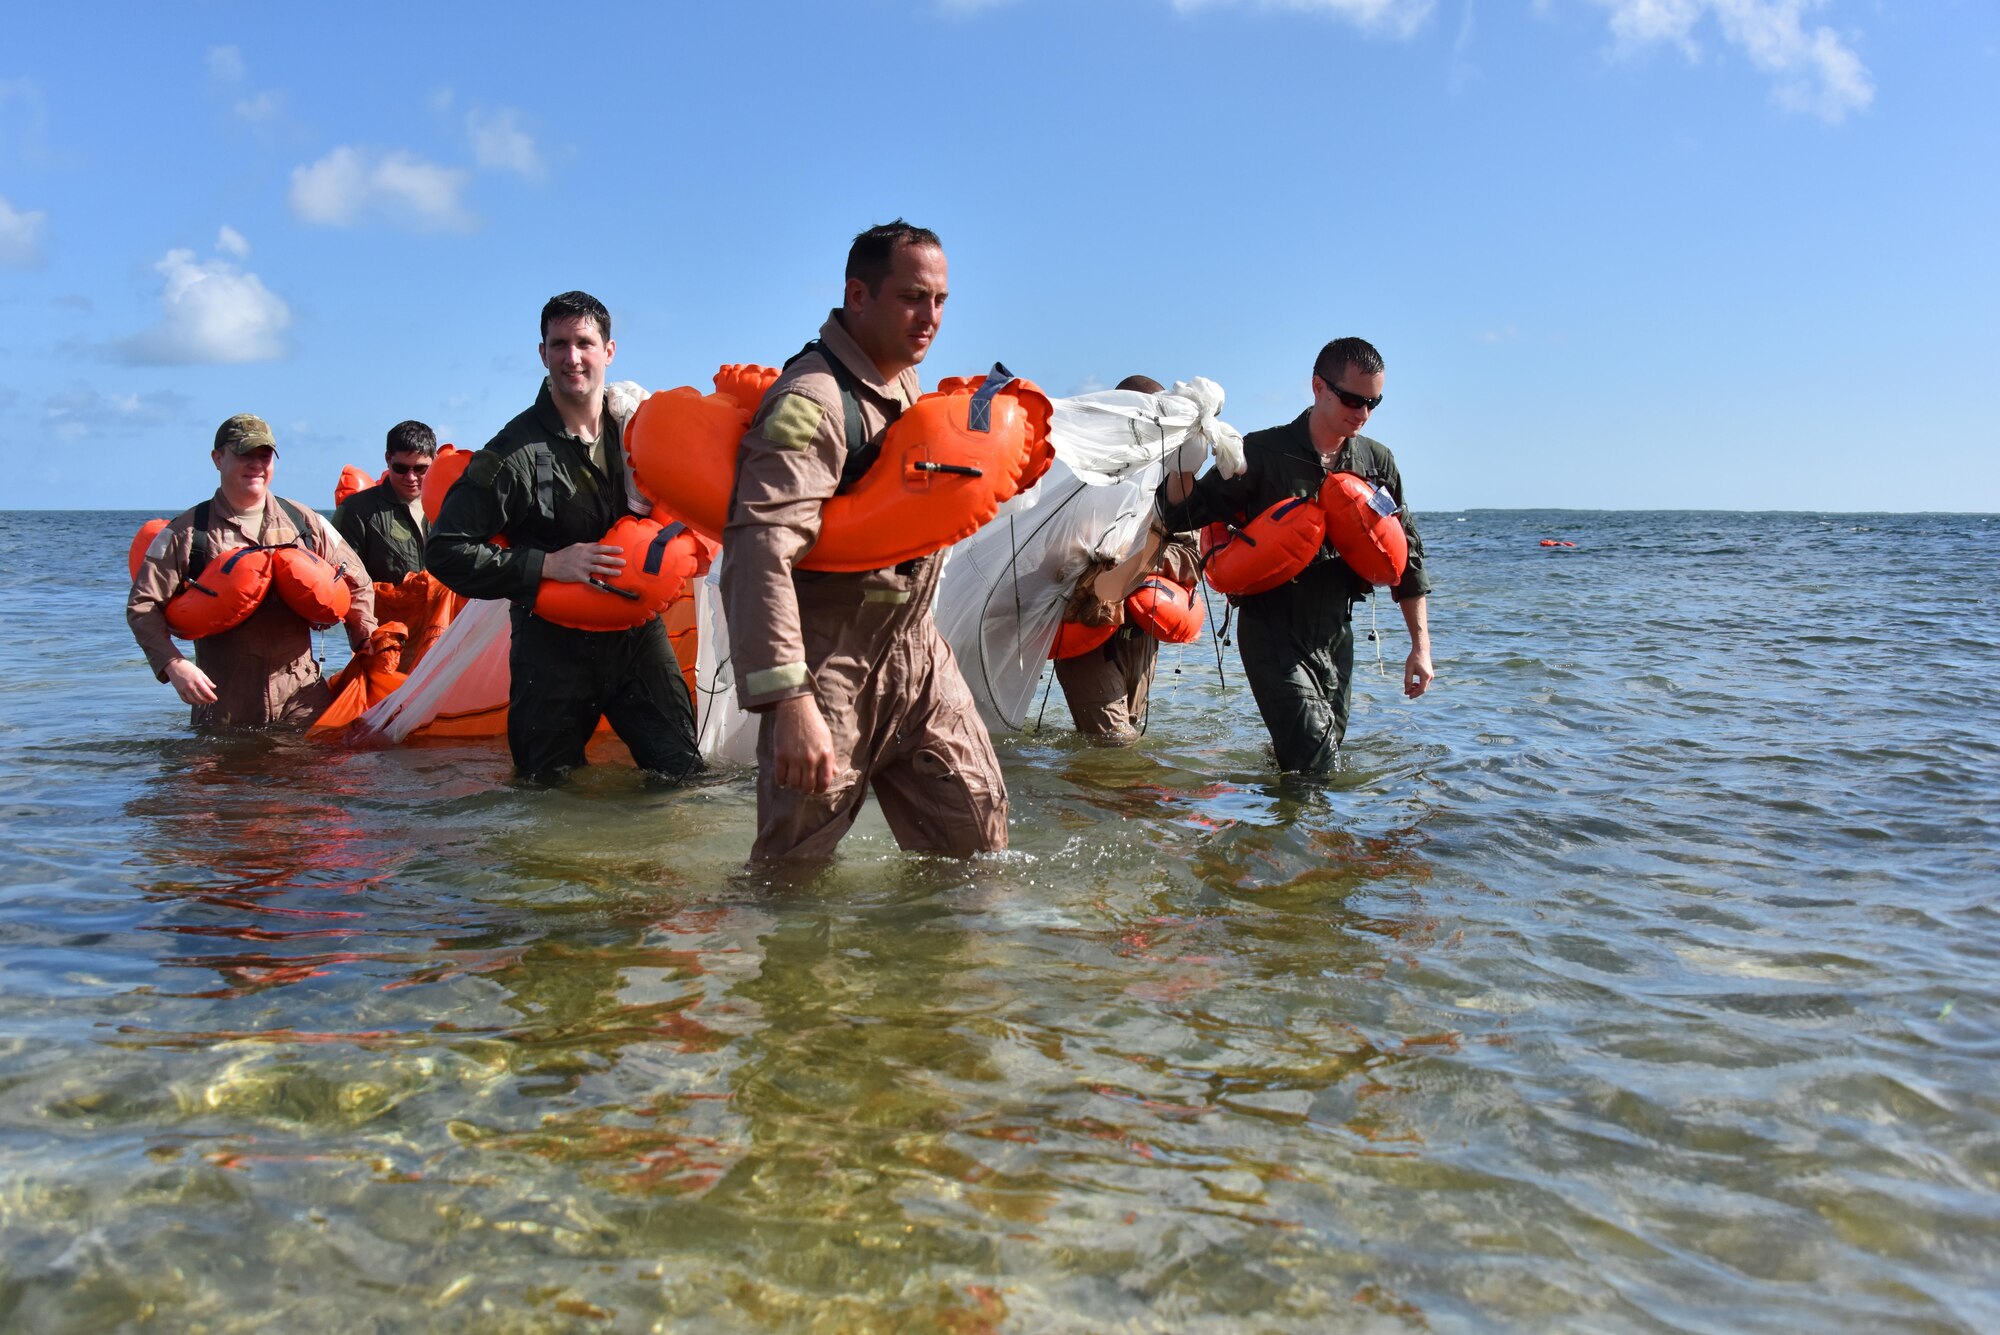 Airmen of the 911th Operations Group bring a parachute to shore after practicing disentanglement at Naval Air Station Key West, Florida, August 18, 2016. To complete this training, Airmen simulated being trapped under the parachute and swam beneath it to the other side. (U.S. Air Force photo by Staff Sgt. Marjorie A. Bowlden)